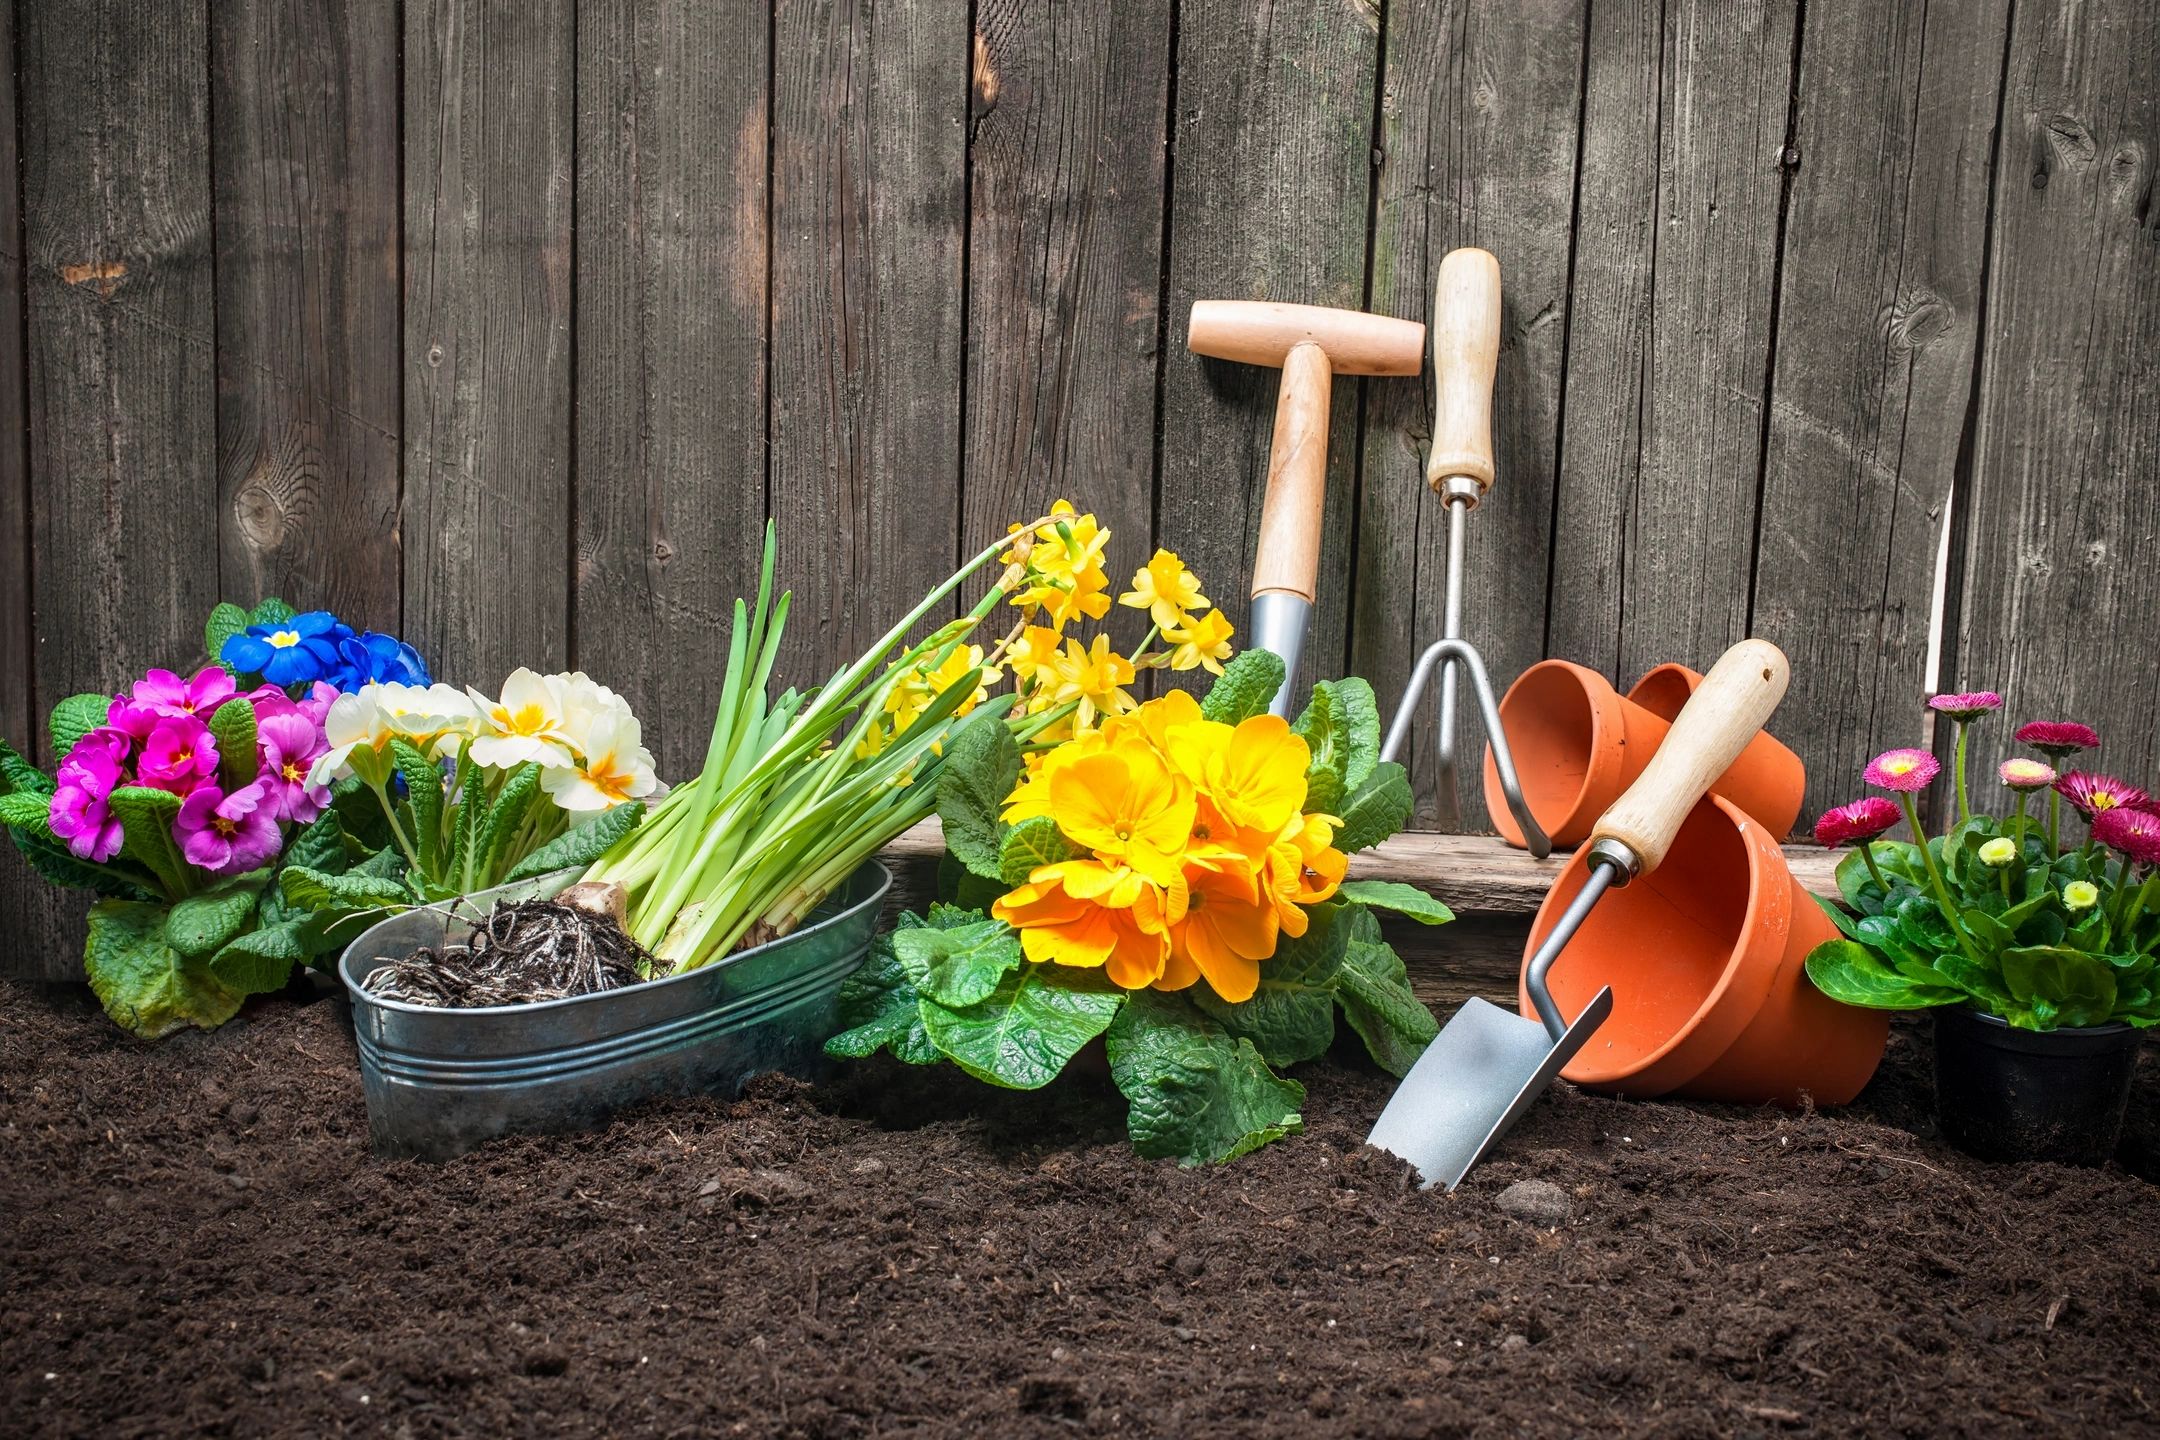 Spring flowers, garden produce, flower pots, and gardening tools sit in a gardening bed.